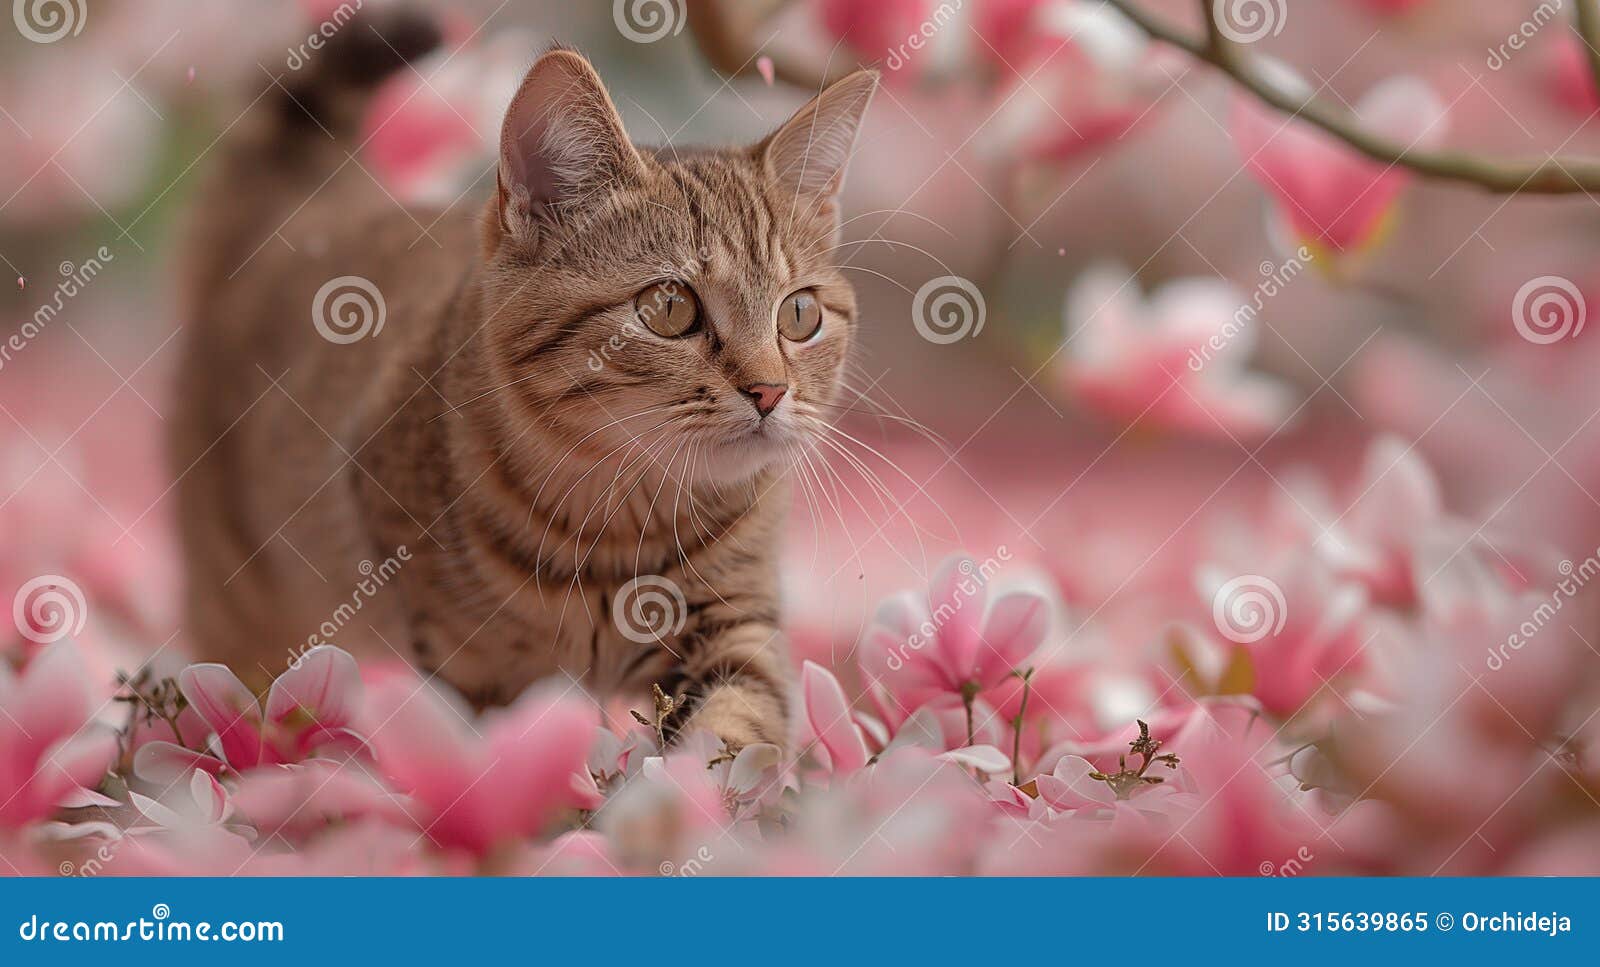 a cat leisurely walks through a field of vibrant pink flowers